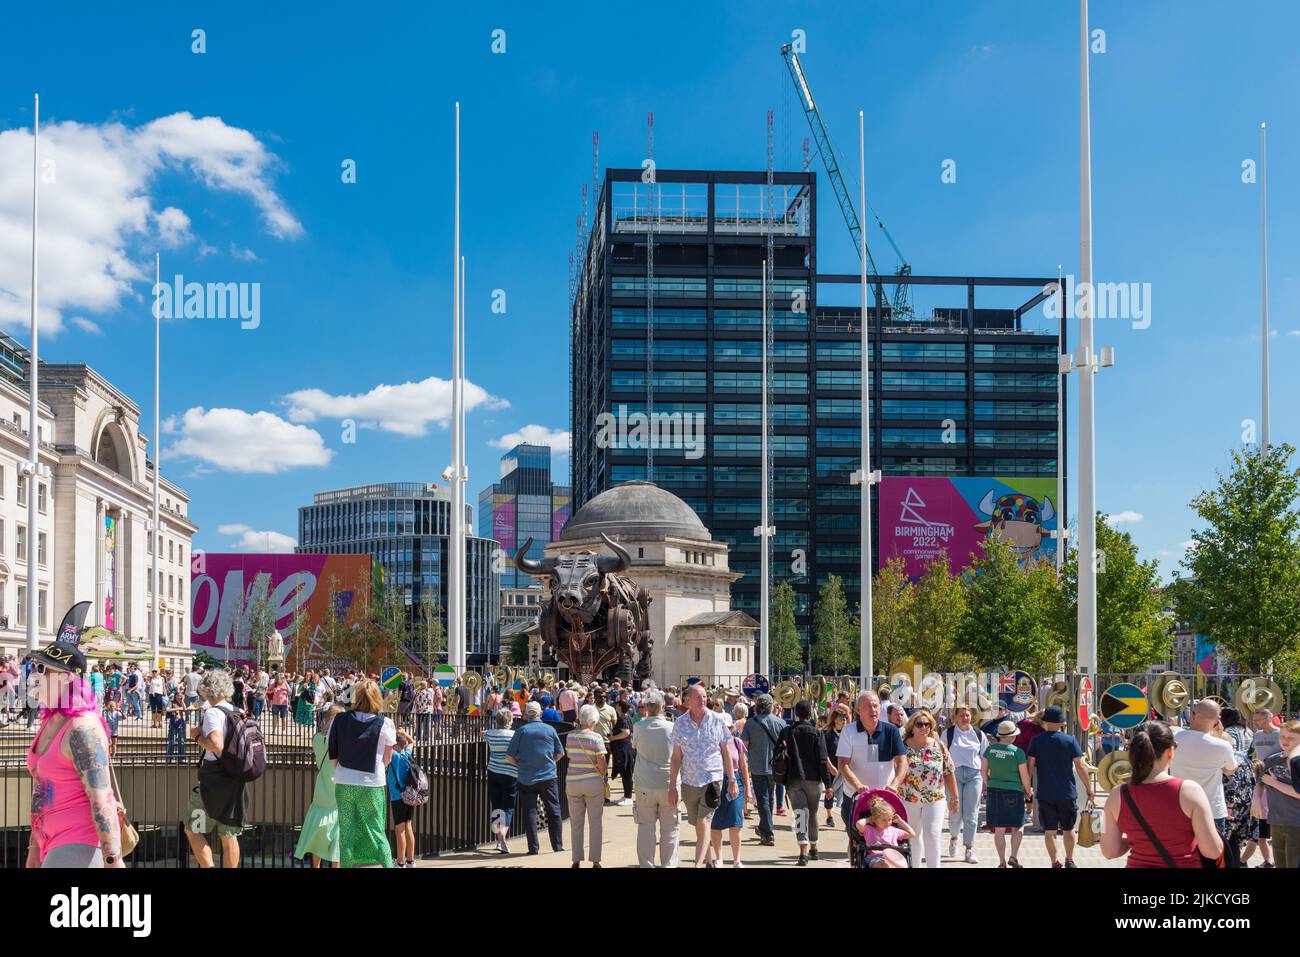 Crowds of visitors in Birmingham for the 2022 Commonwealth Games Stock Photo